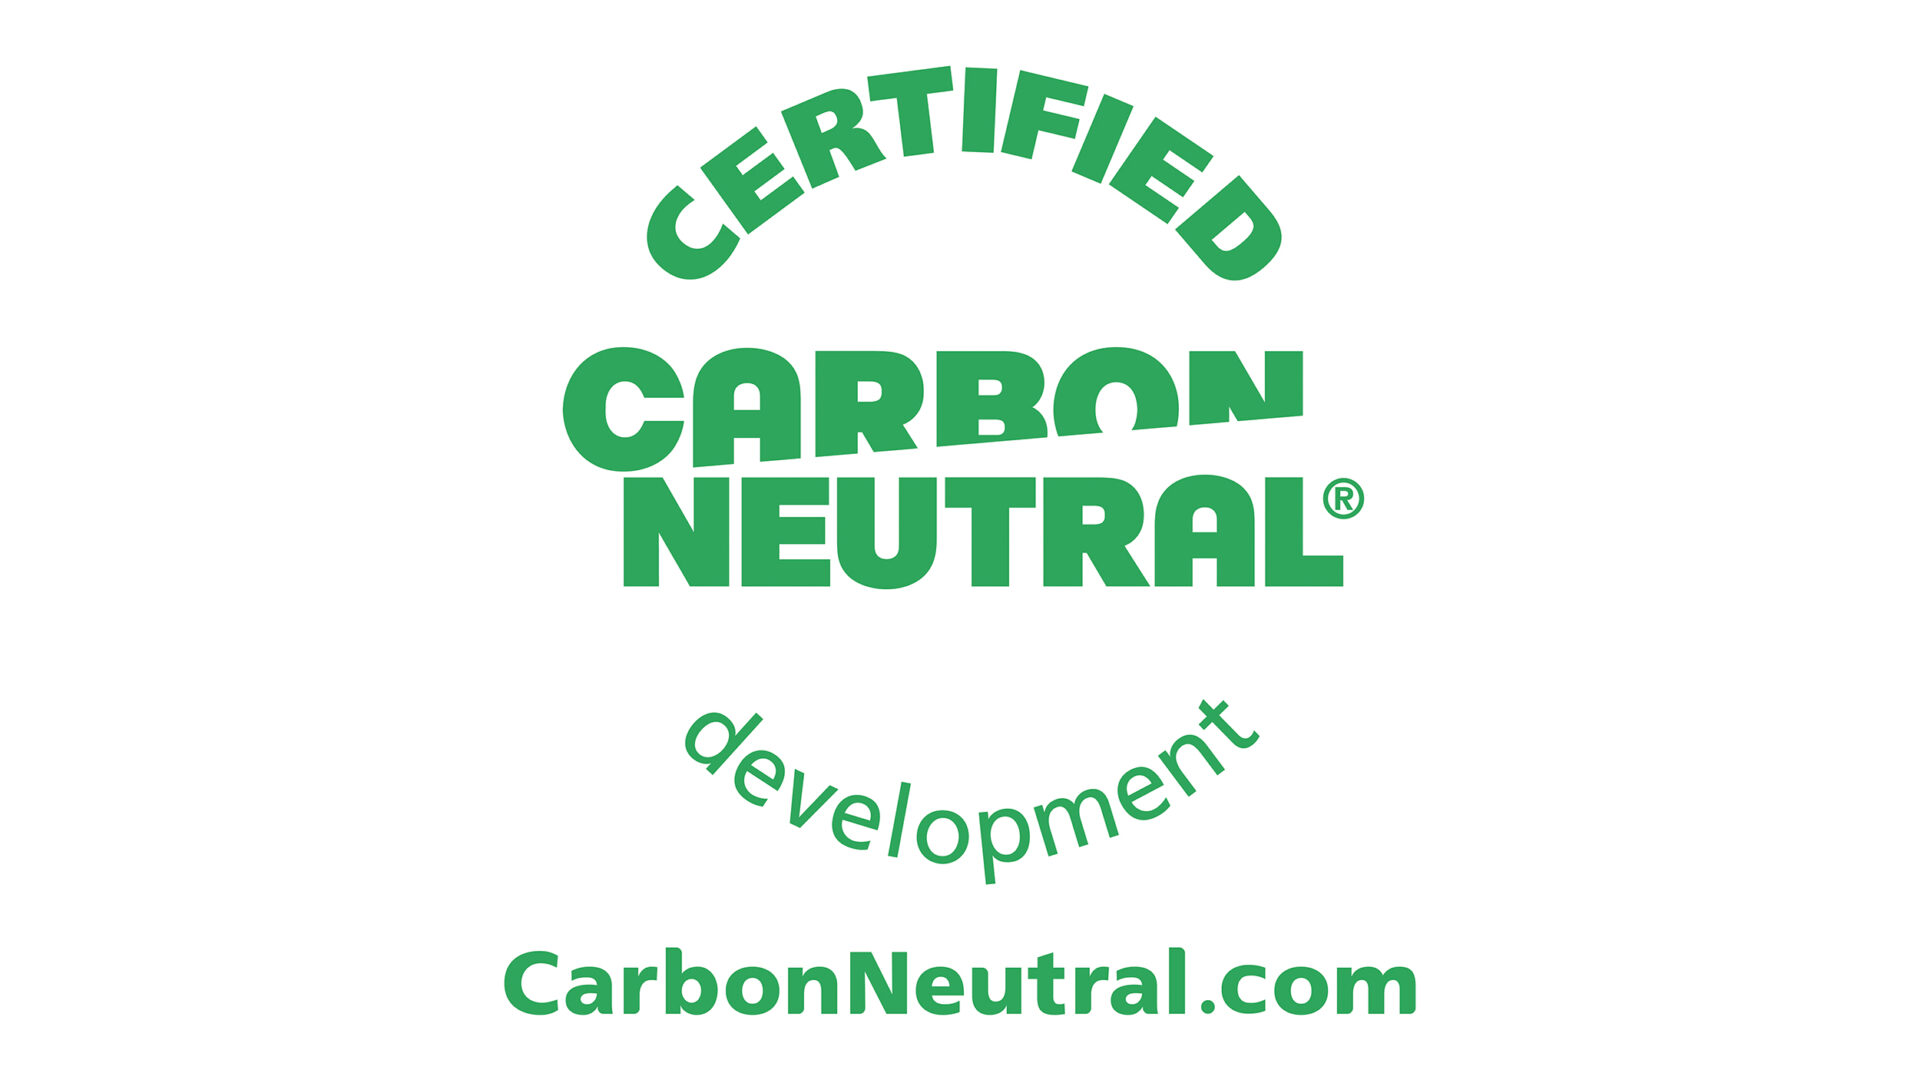 Carbon Neutral certification - King's Cross